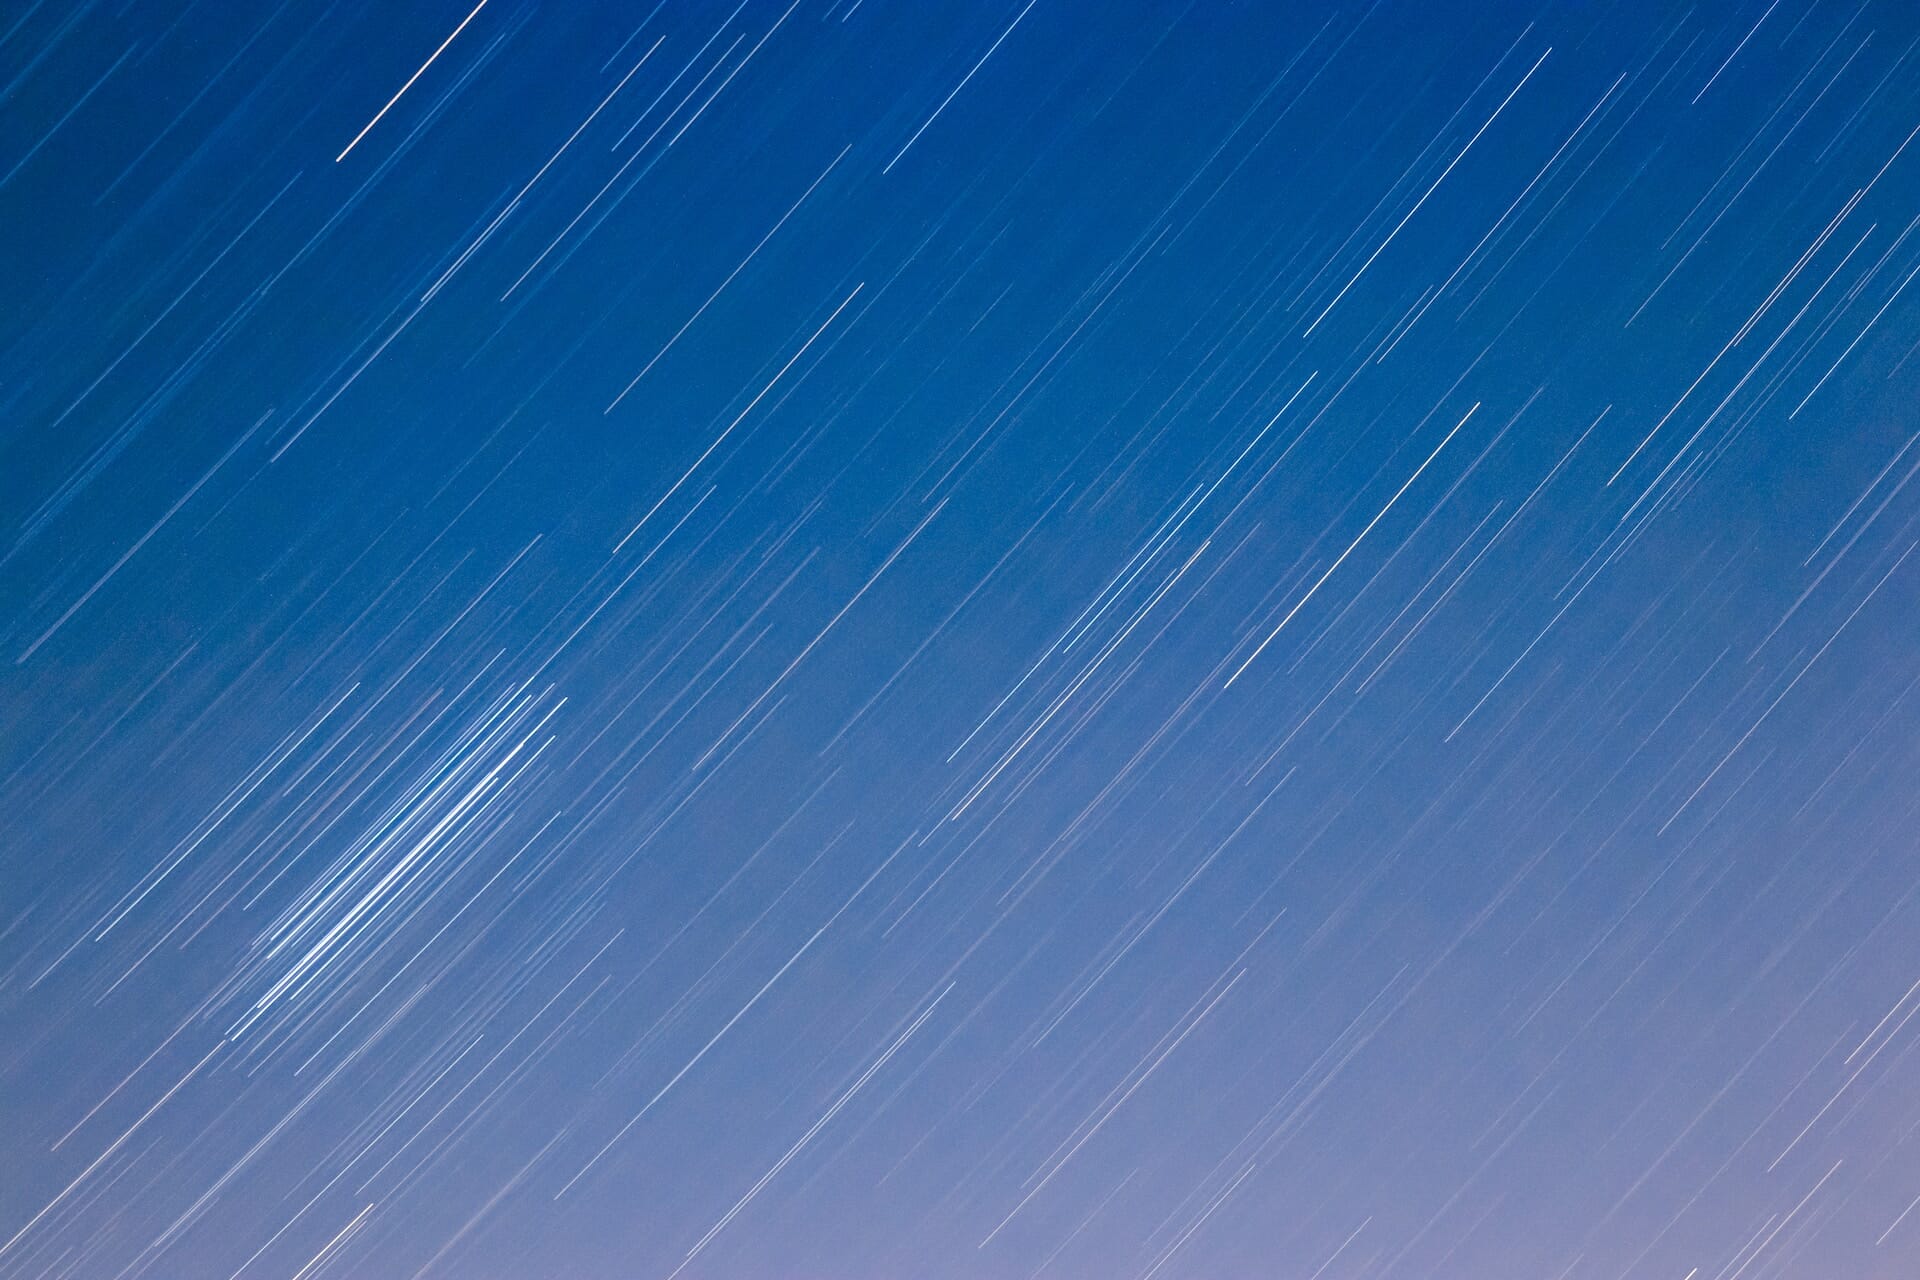 Shooting Star Time Lapse Photo